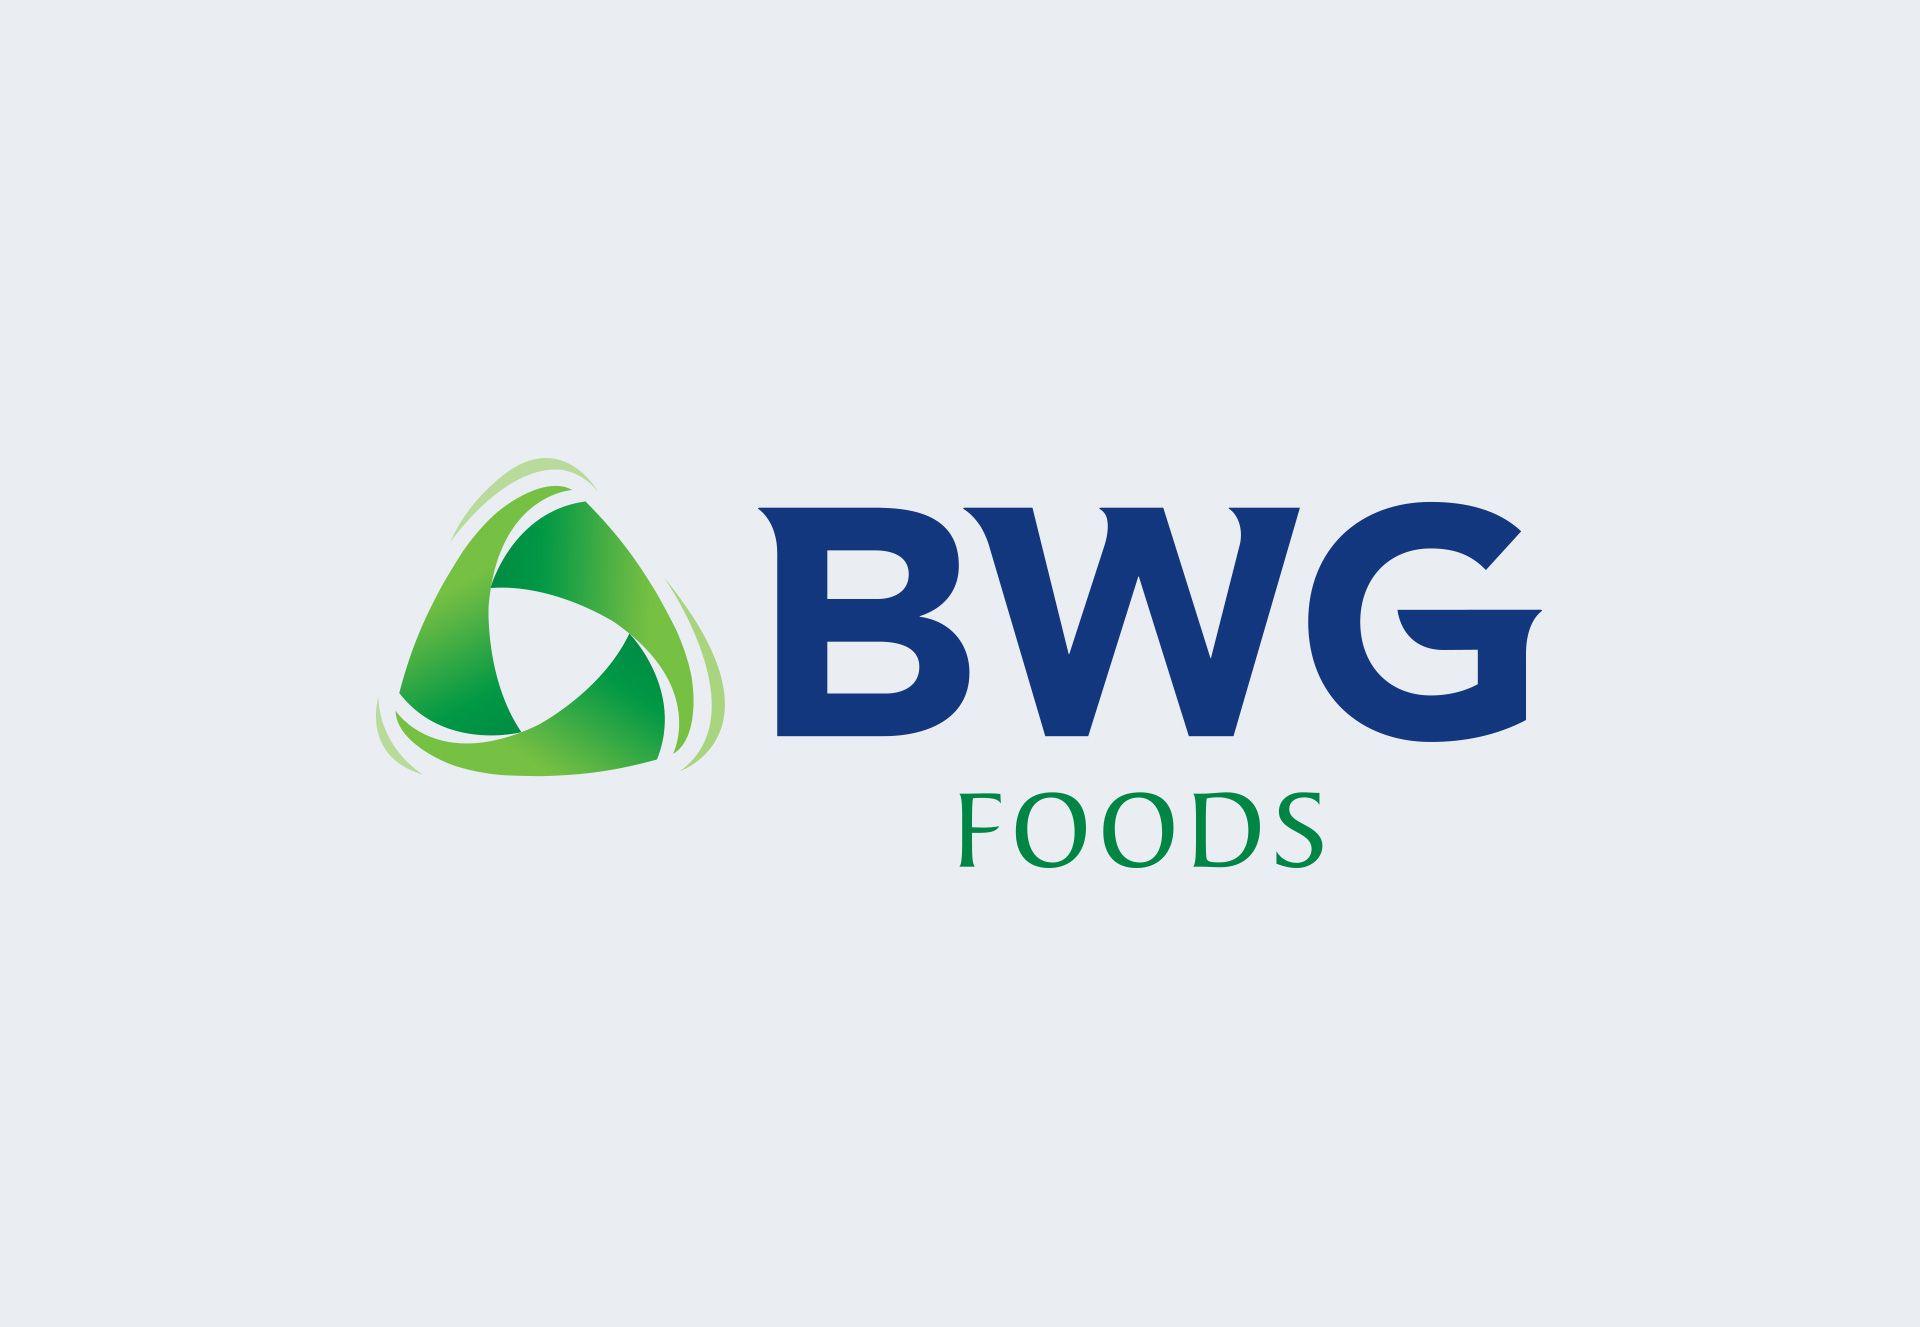 BWG Logo - BWG Group acquired by Pernod Ricard �